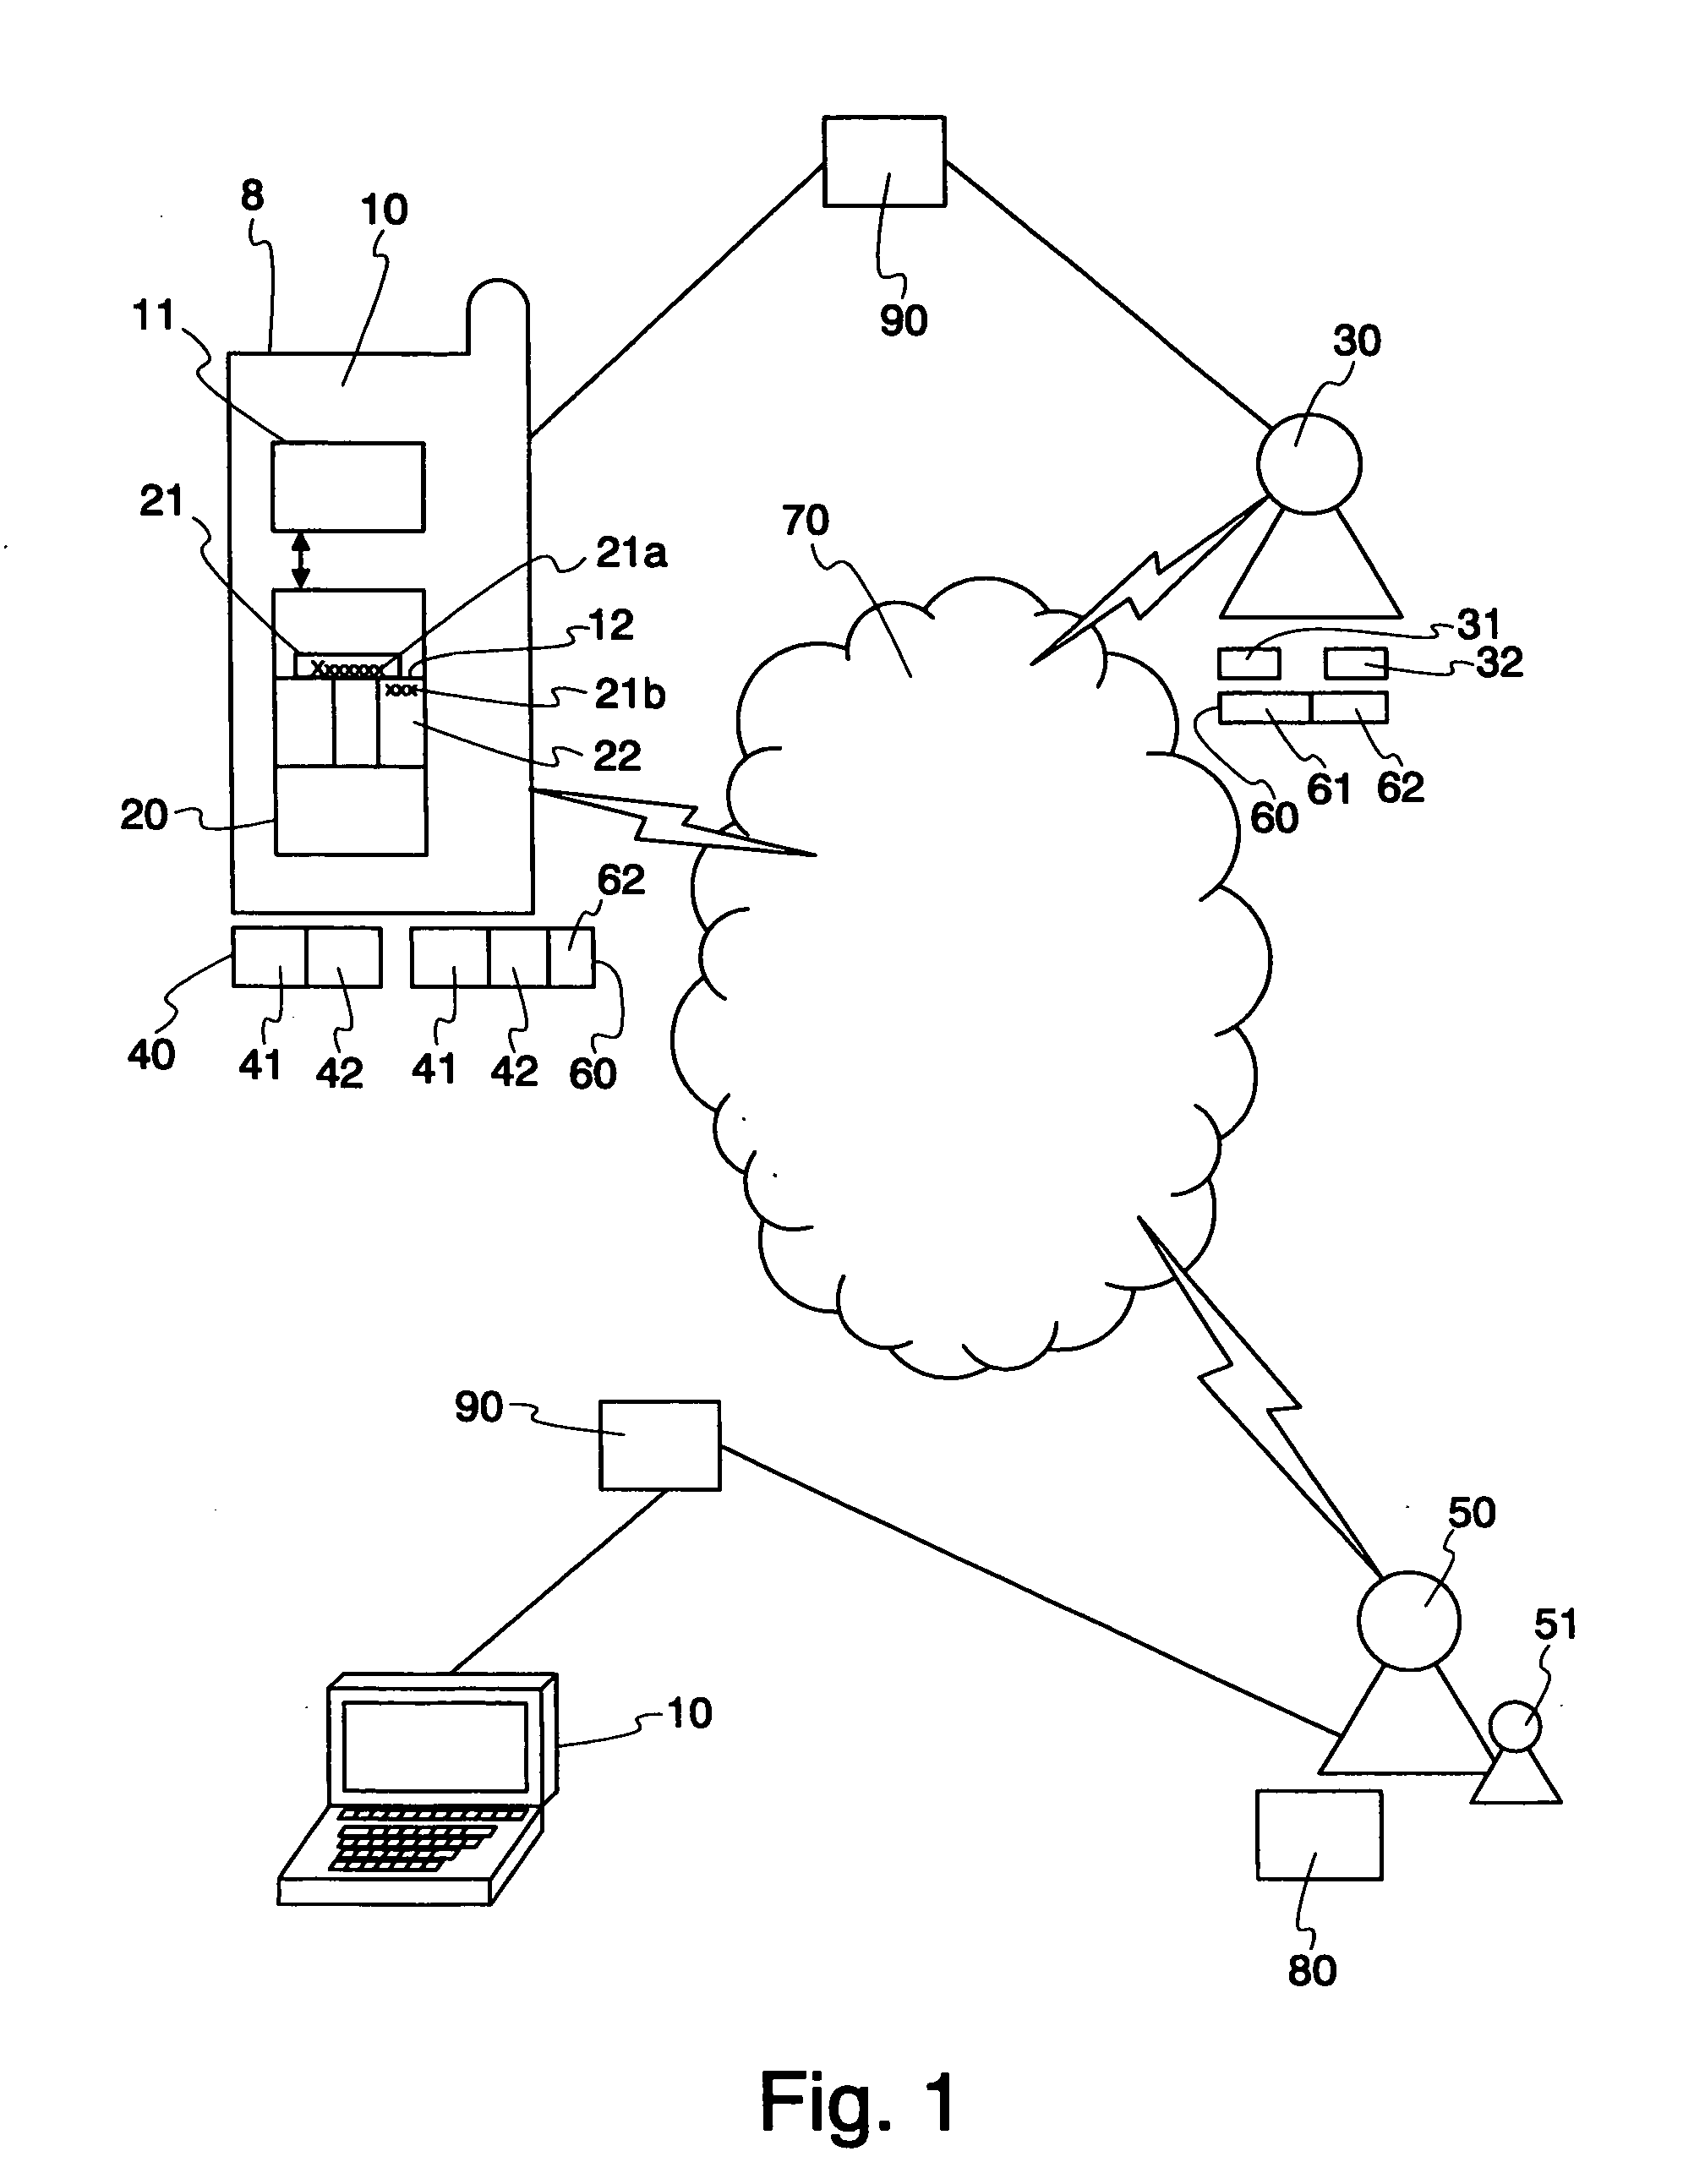 Procedure for the preparation and performing of a post issuance process on a secure element